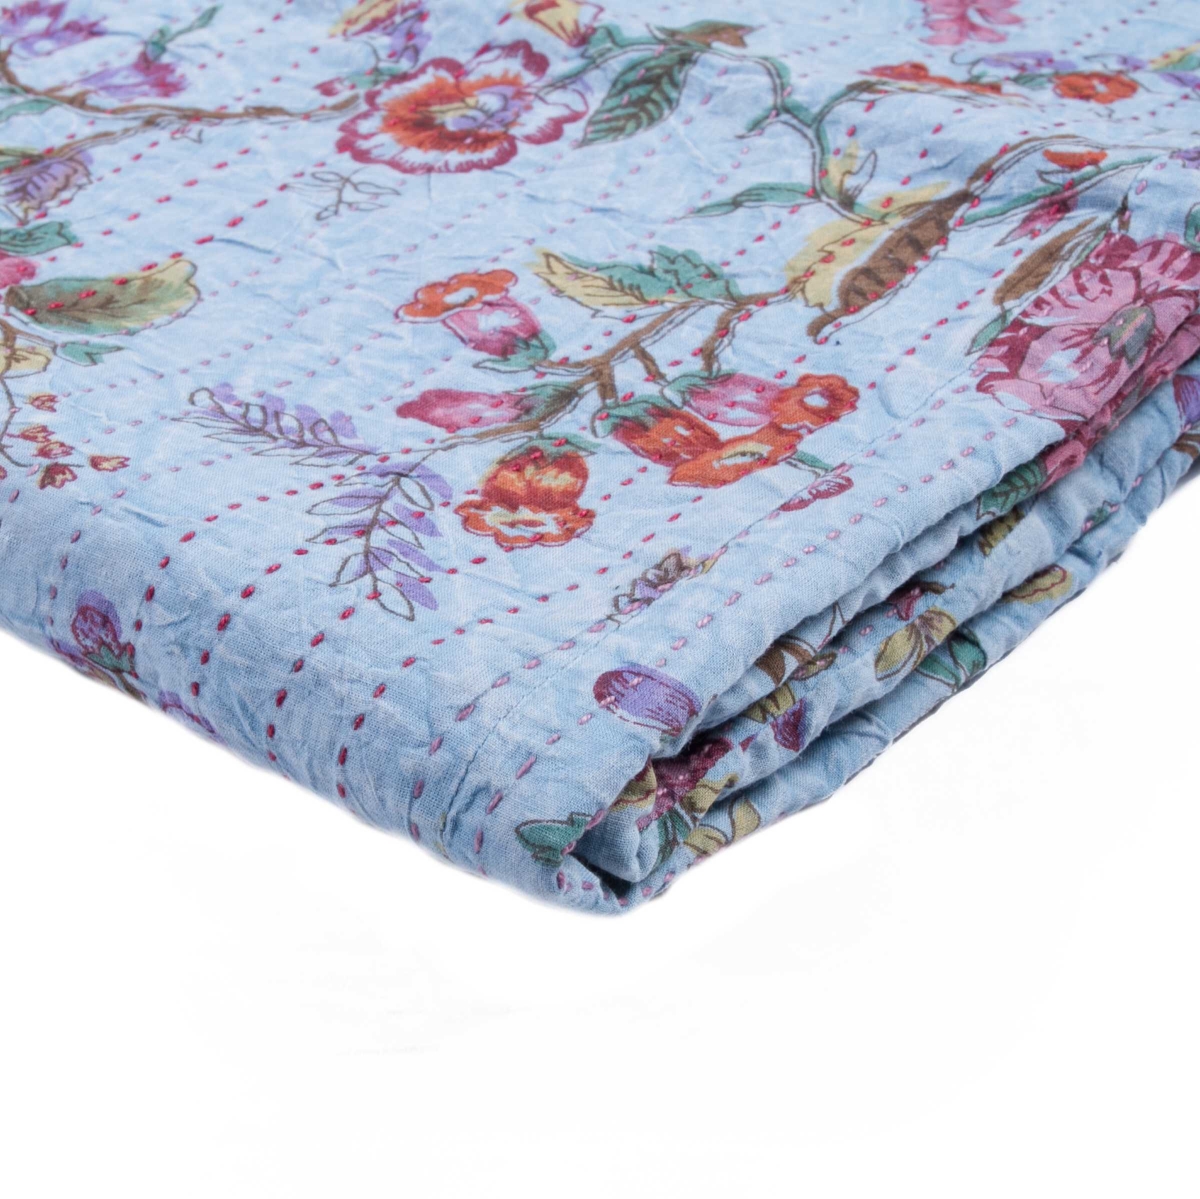 Home Roots Beddings 332344 Kantha Cotton Throw - 1117-no.26, Multicolor - 50 X 70 In.